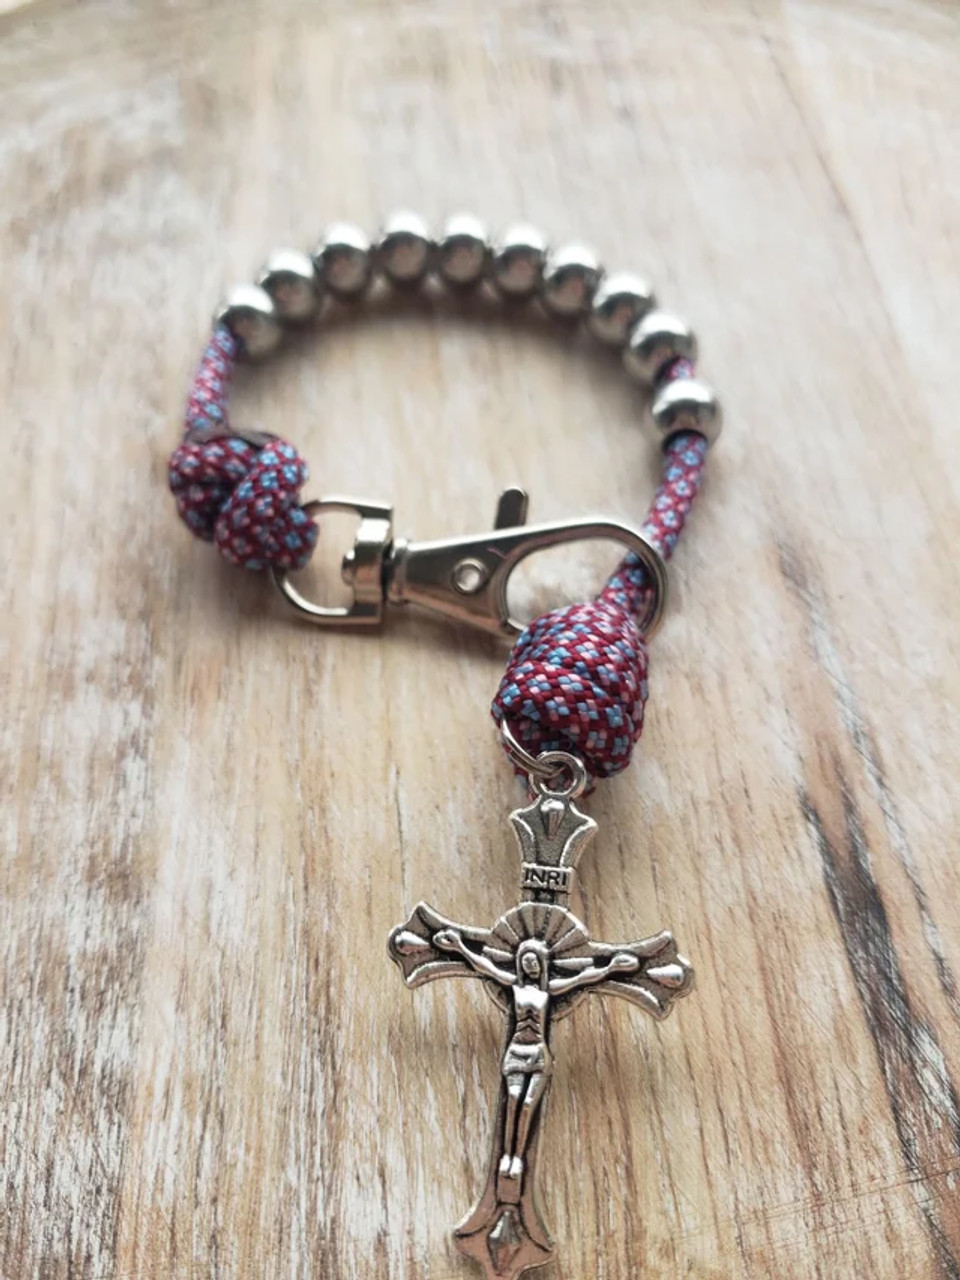 Kolbe & Co. - Clip & Carry One Decade Rosary - Maroon/Blue/Pink